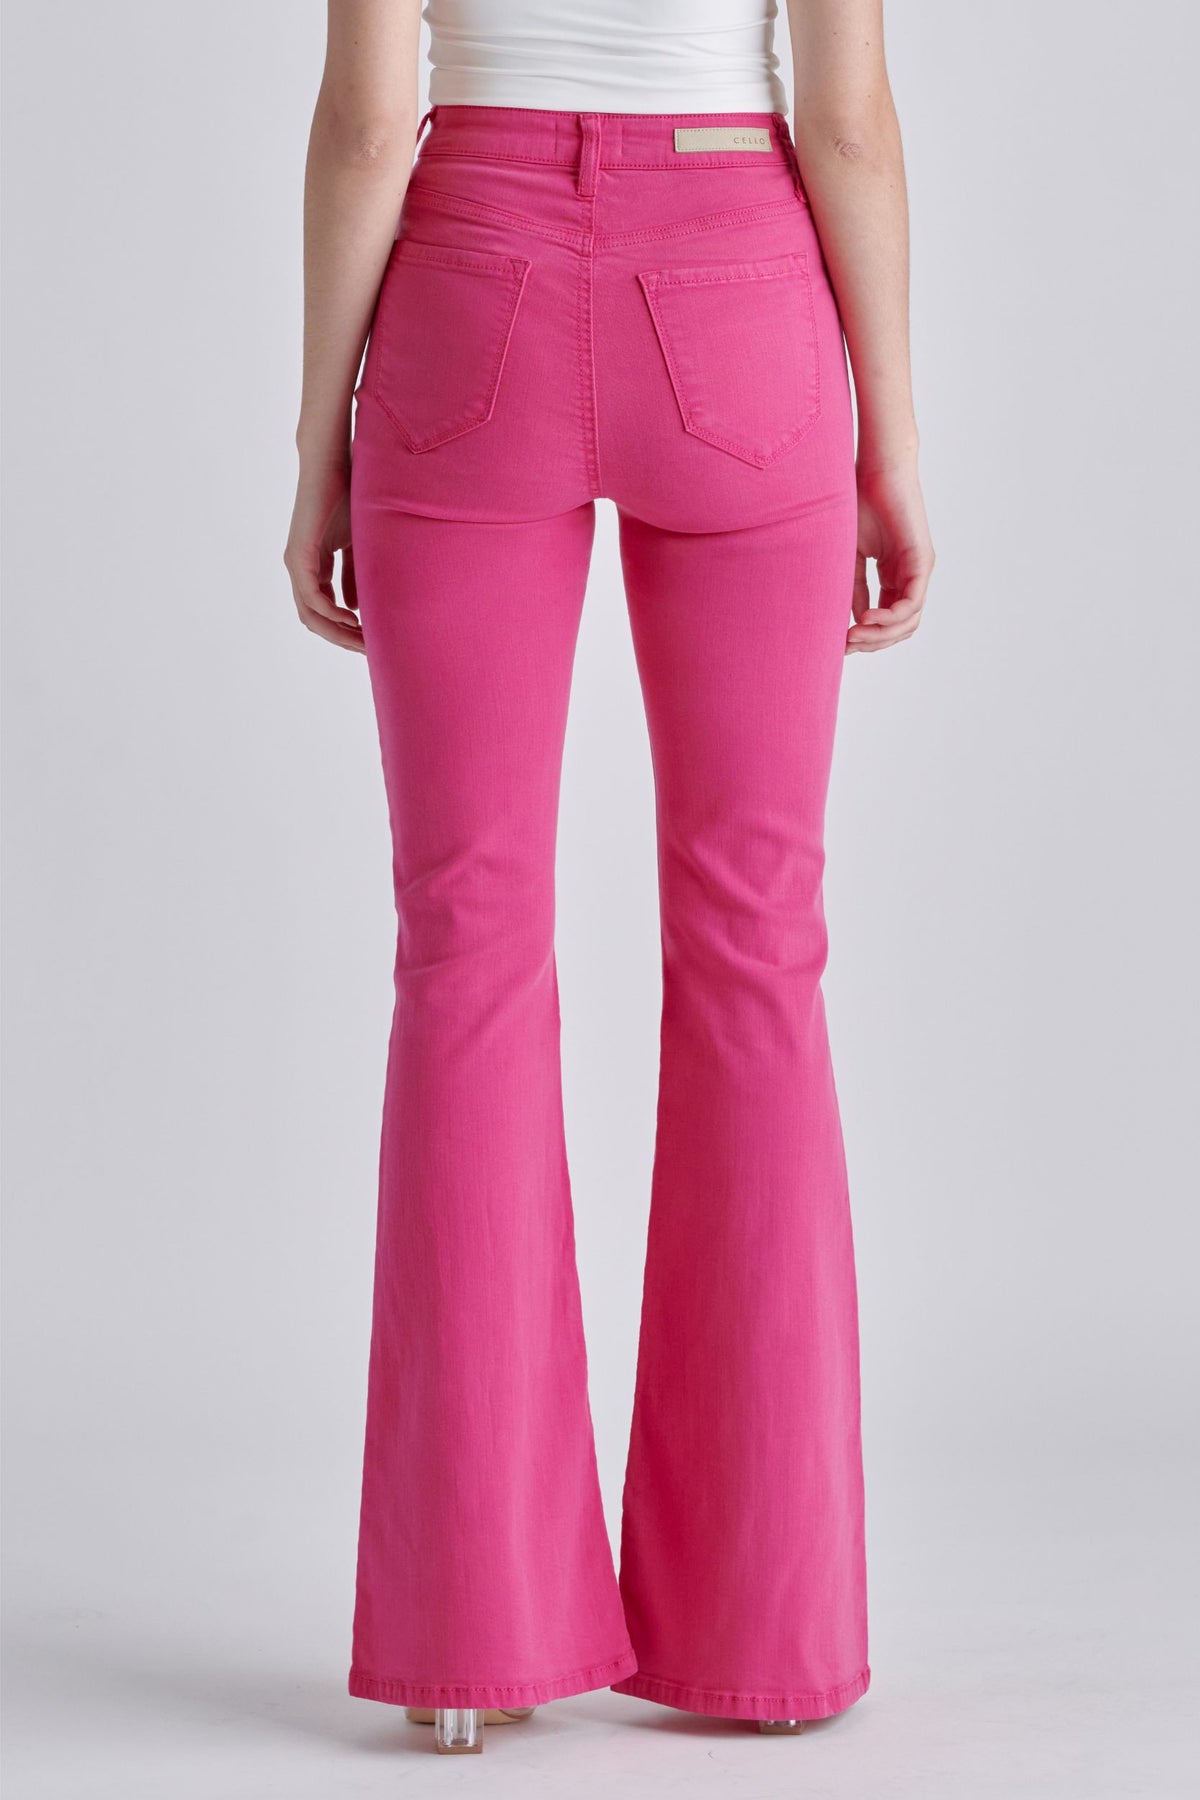 Raspberry Flare Jeans - Southern Grace Creations